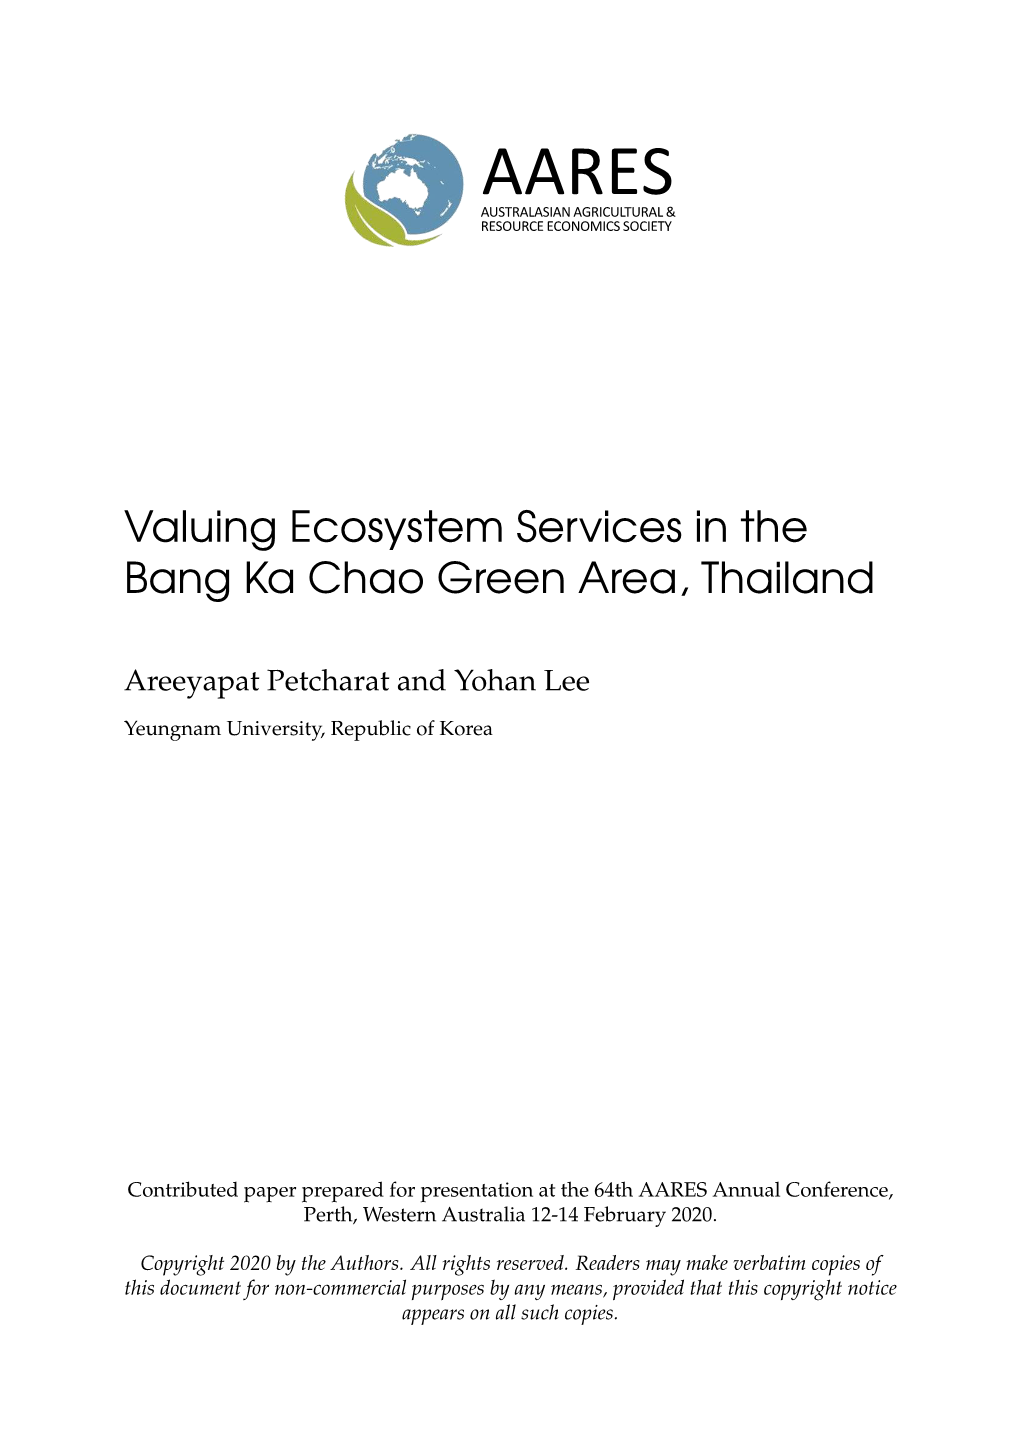 Valuing Ecosystem Services in the Bang Ka Chao Green Area, Thailand